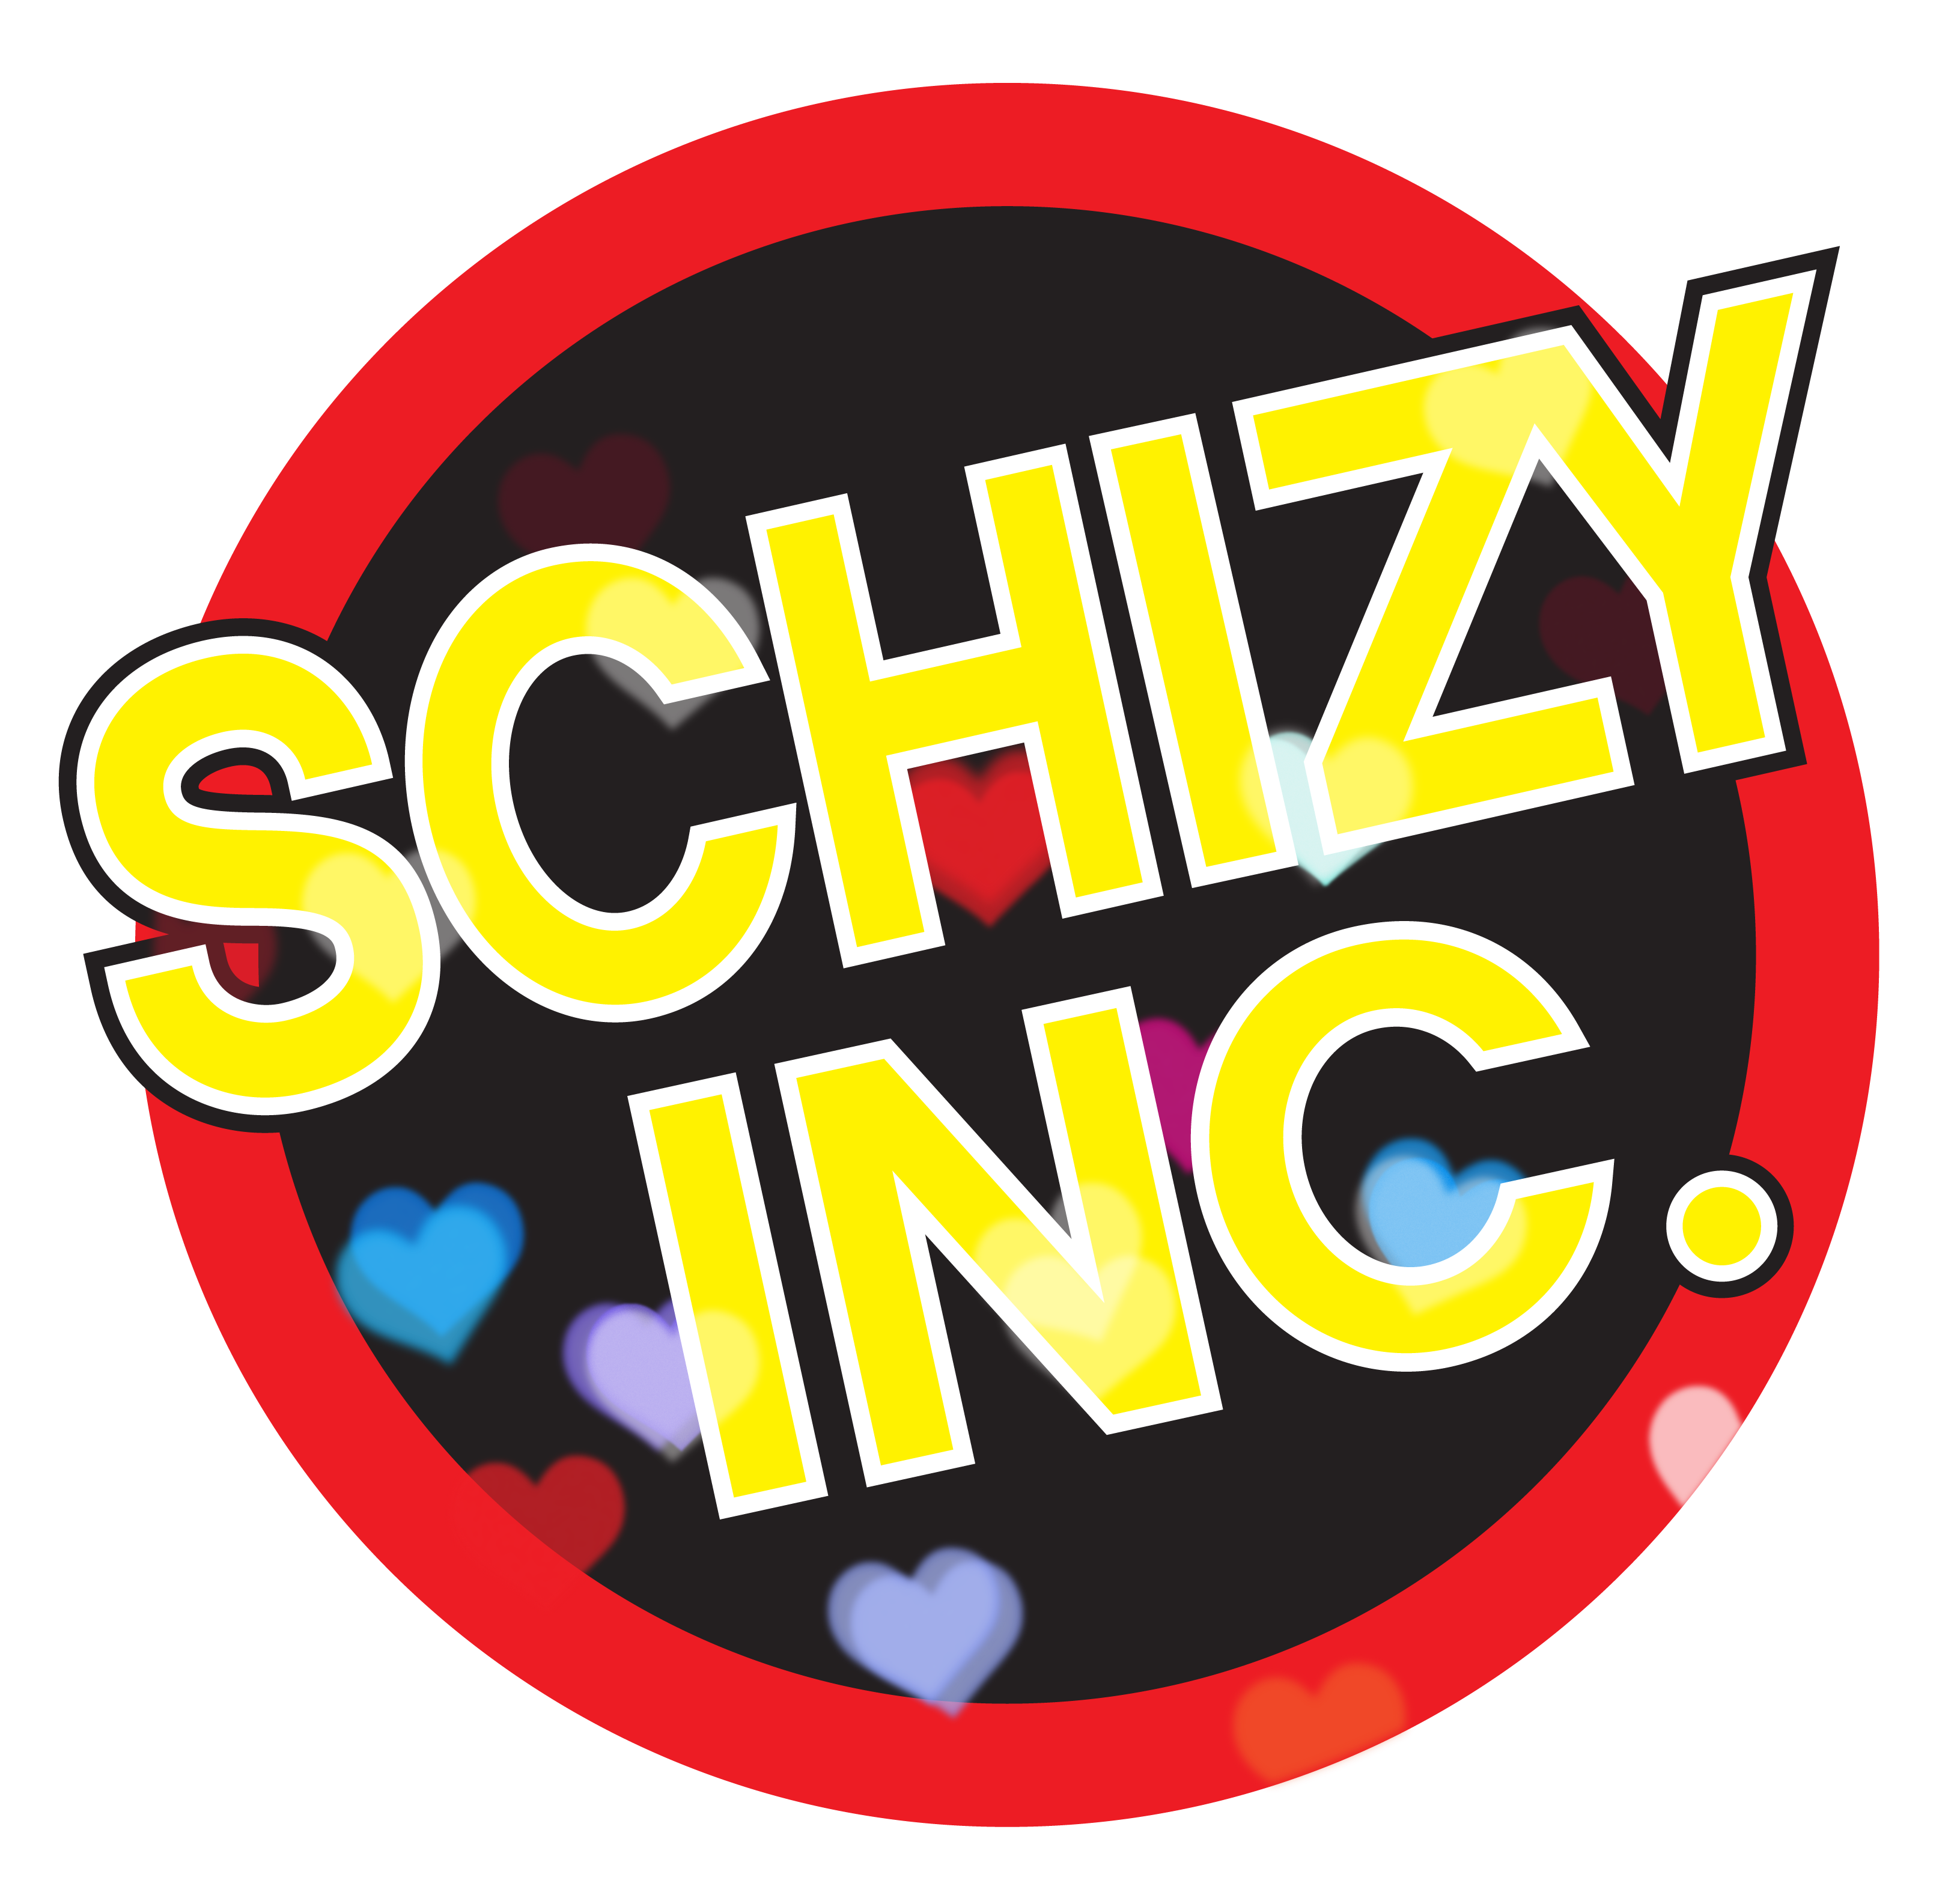 Schizy inc. logo with the words SCHIZY INC. in yellow.